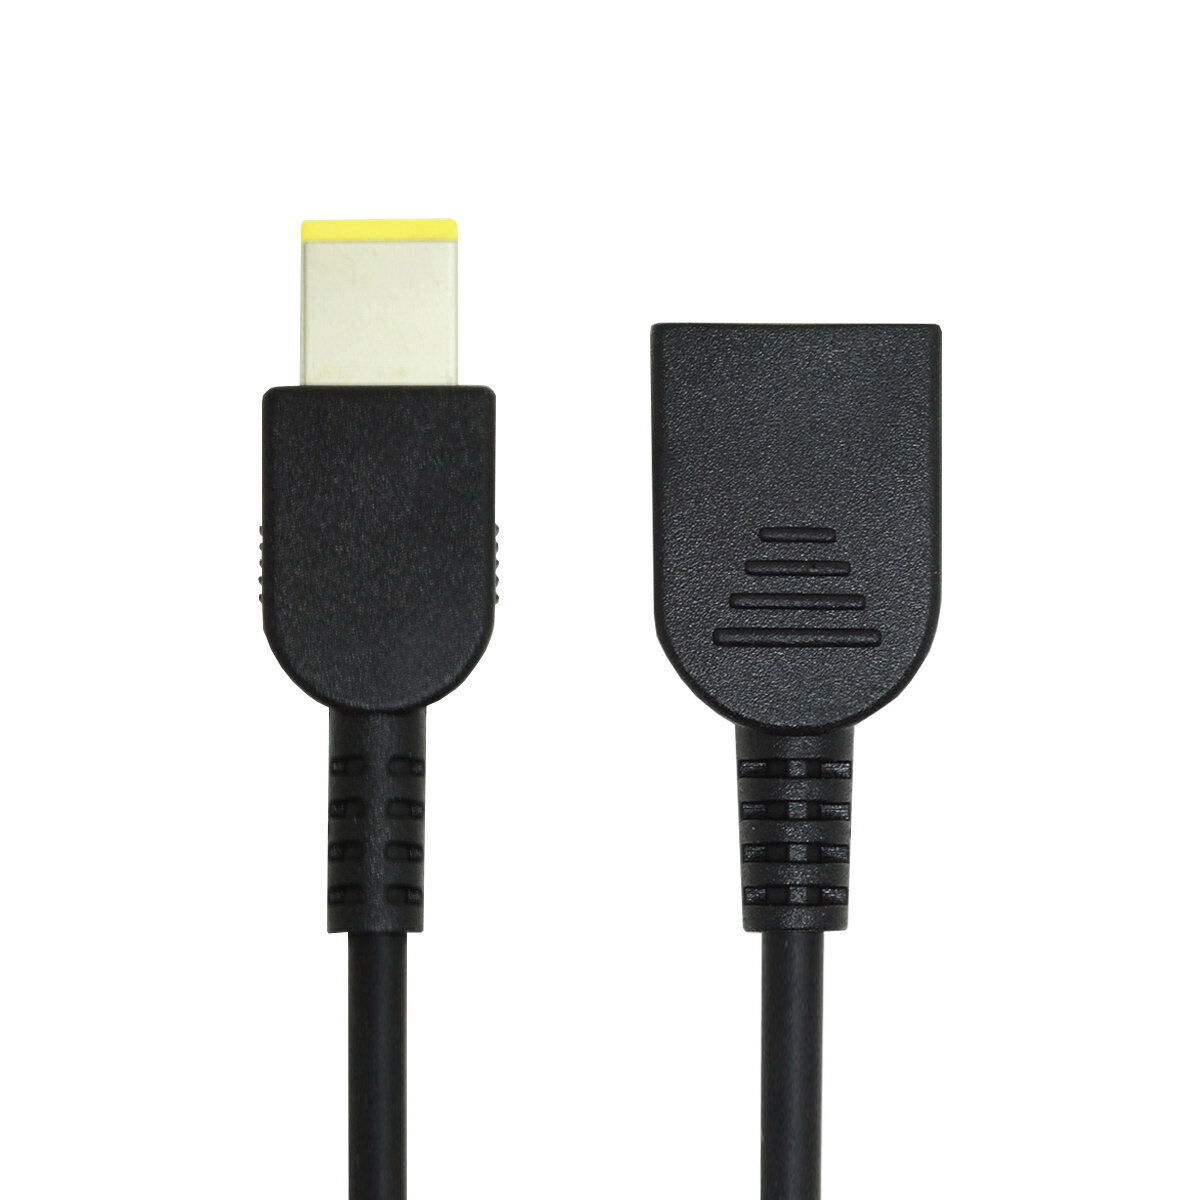 Chenyang Rectangle Male to Female Extension Power Plug Cable for ThinkPad X1